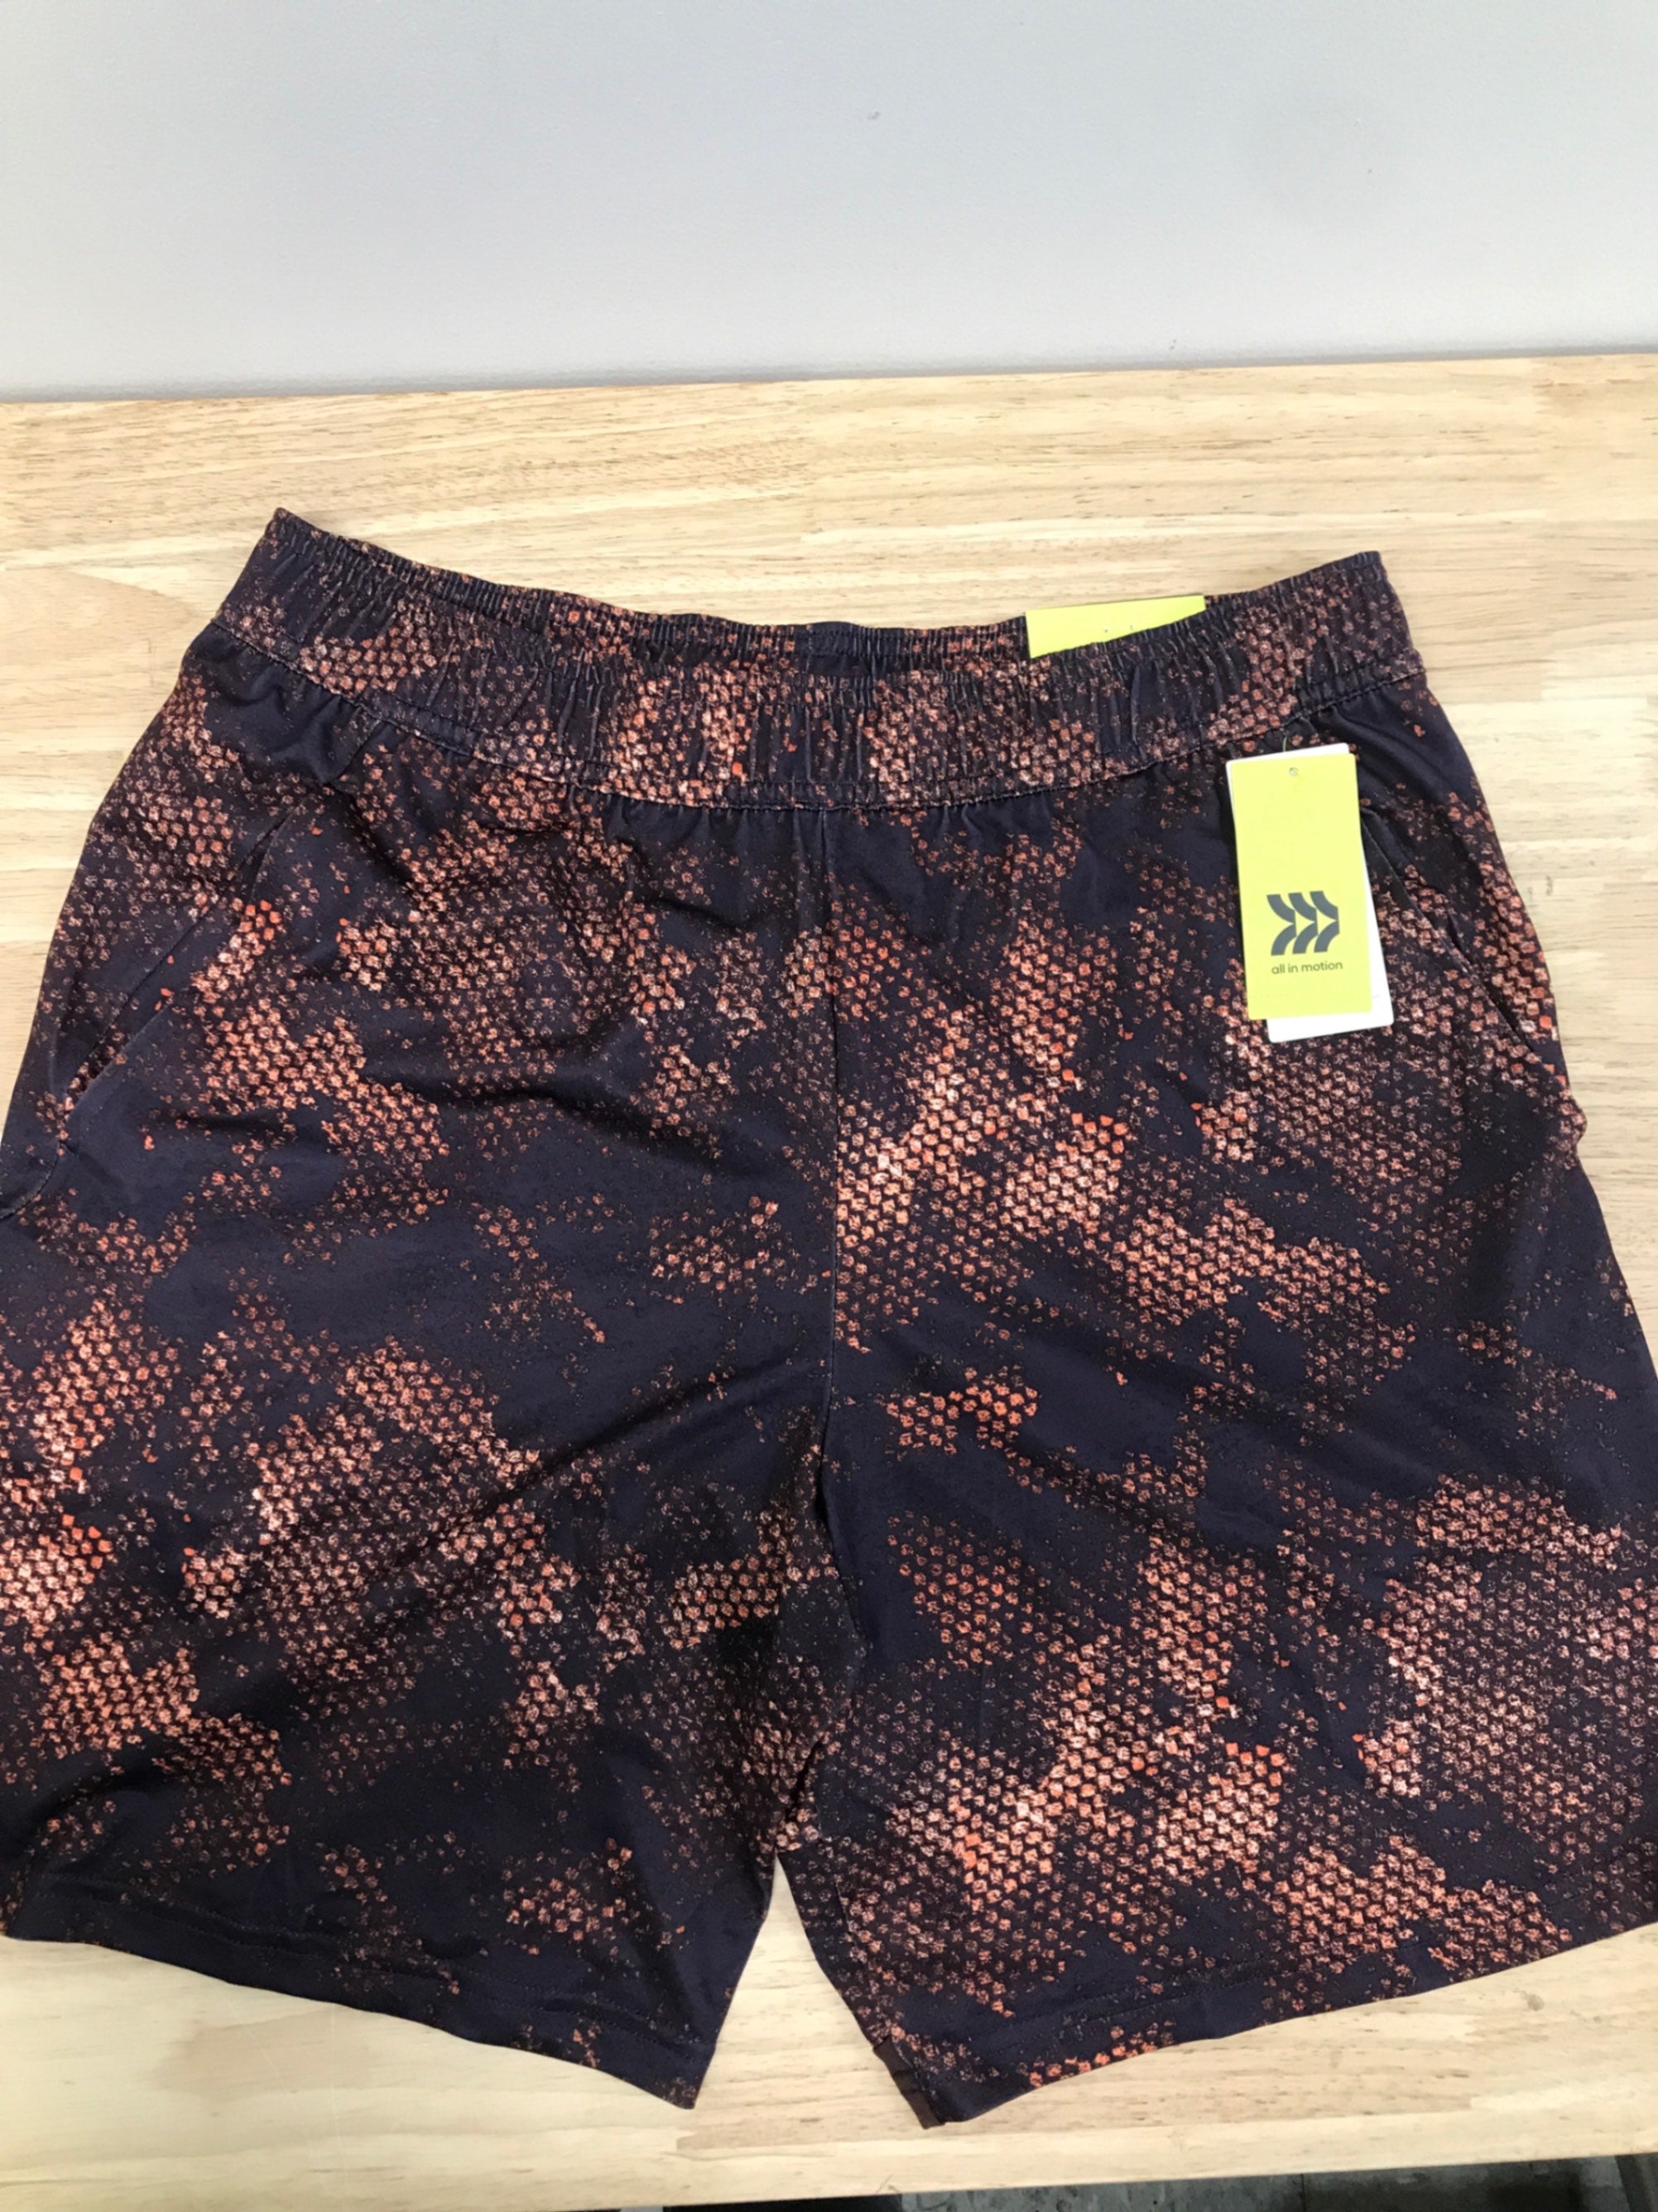 All in Motion Men's Camo Print Training Shorts 8.5 - (as1, Alpha, m